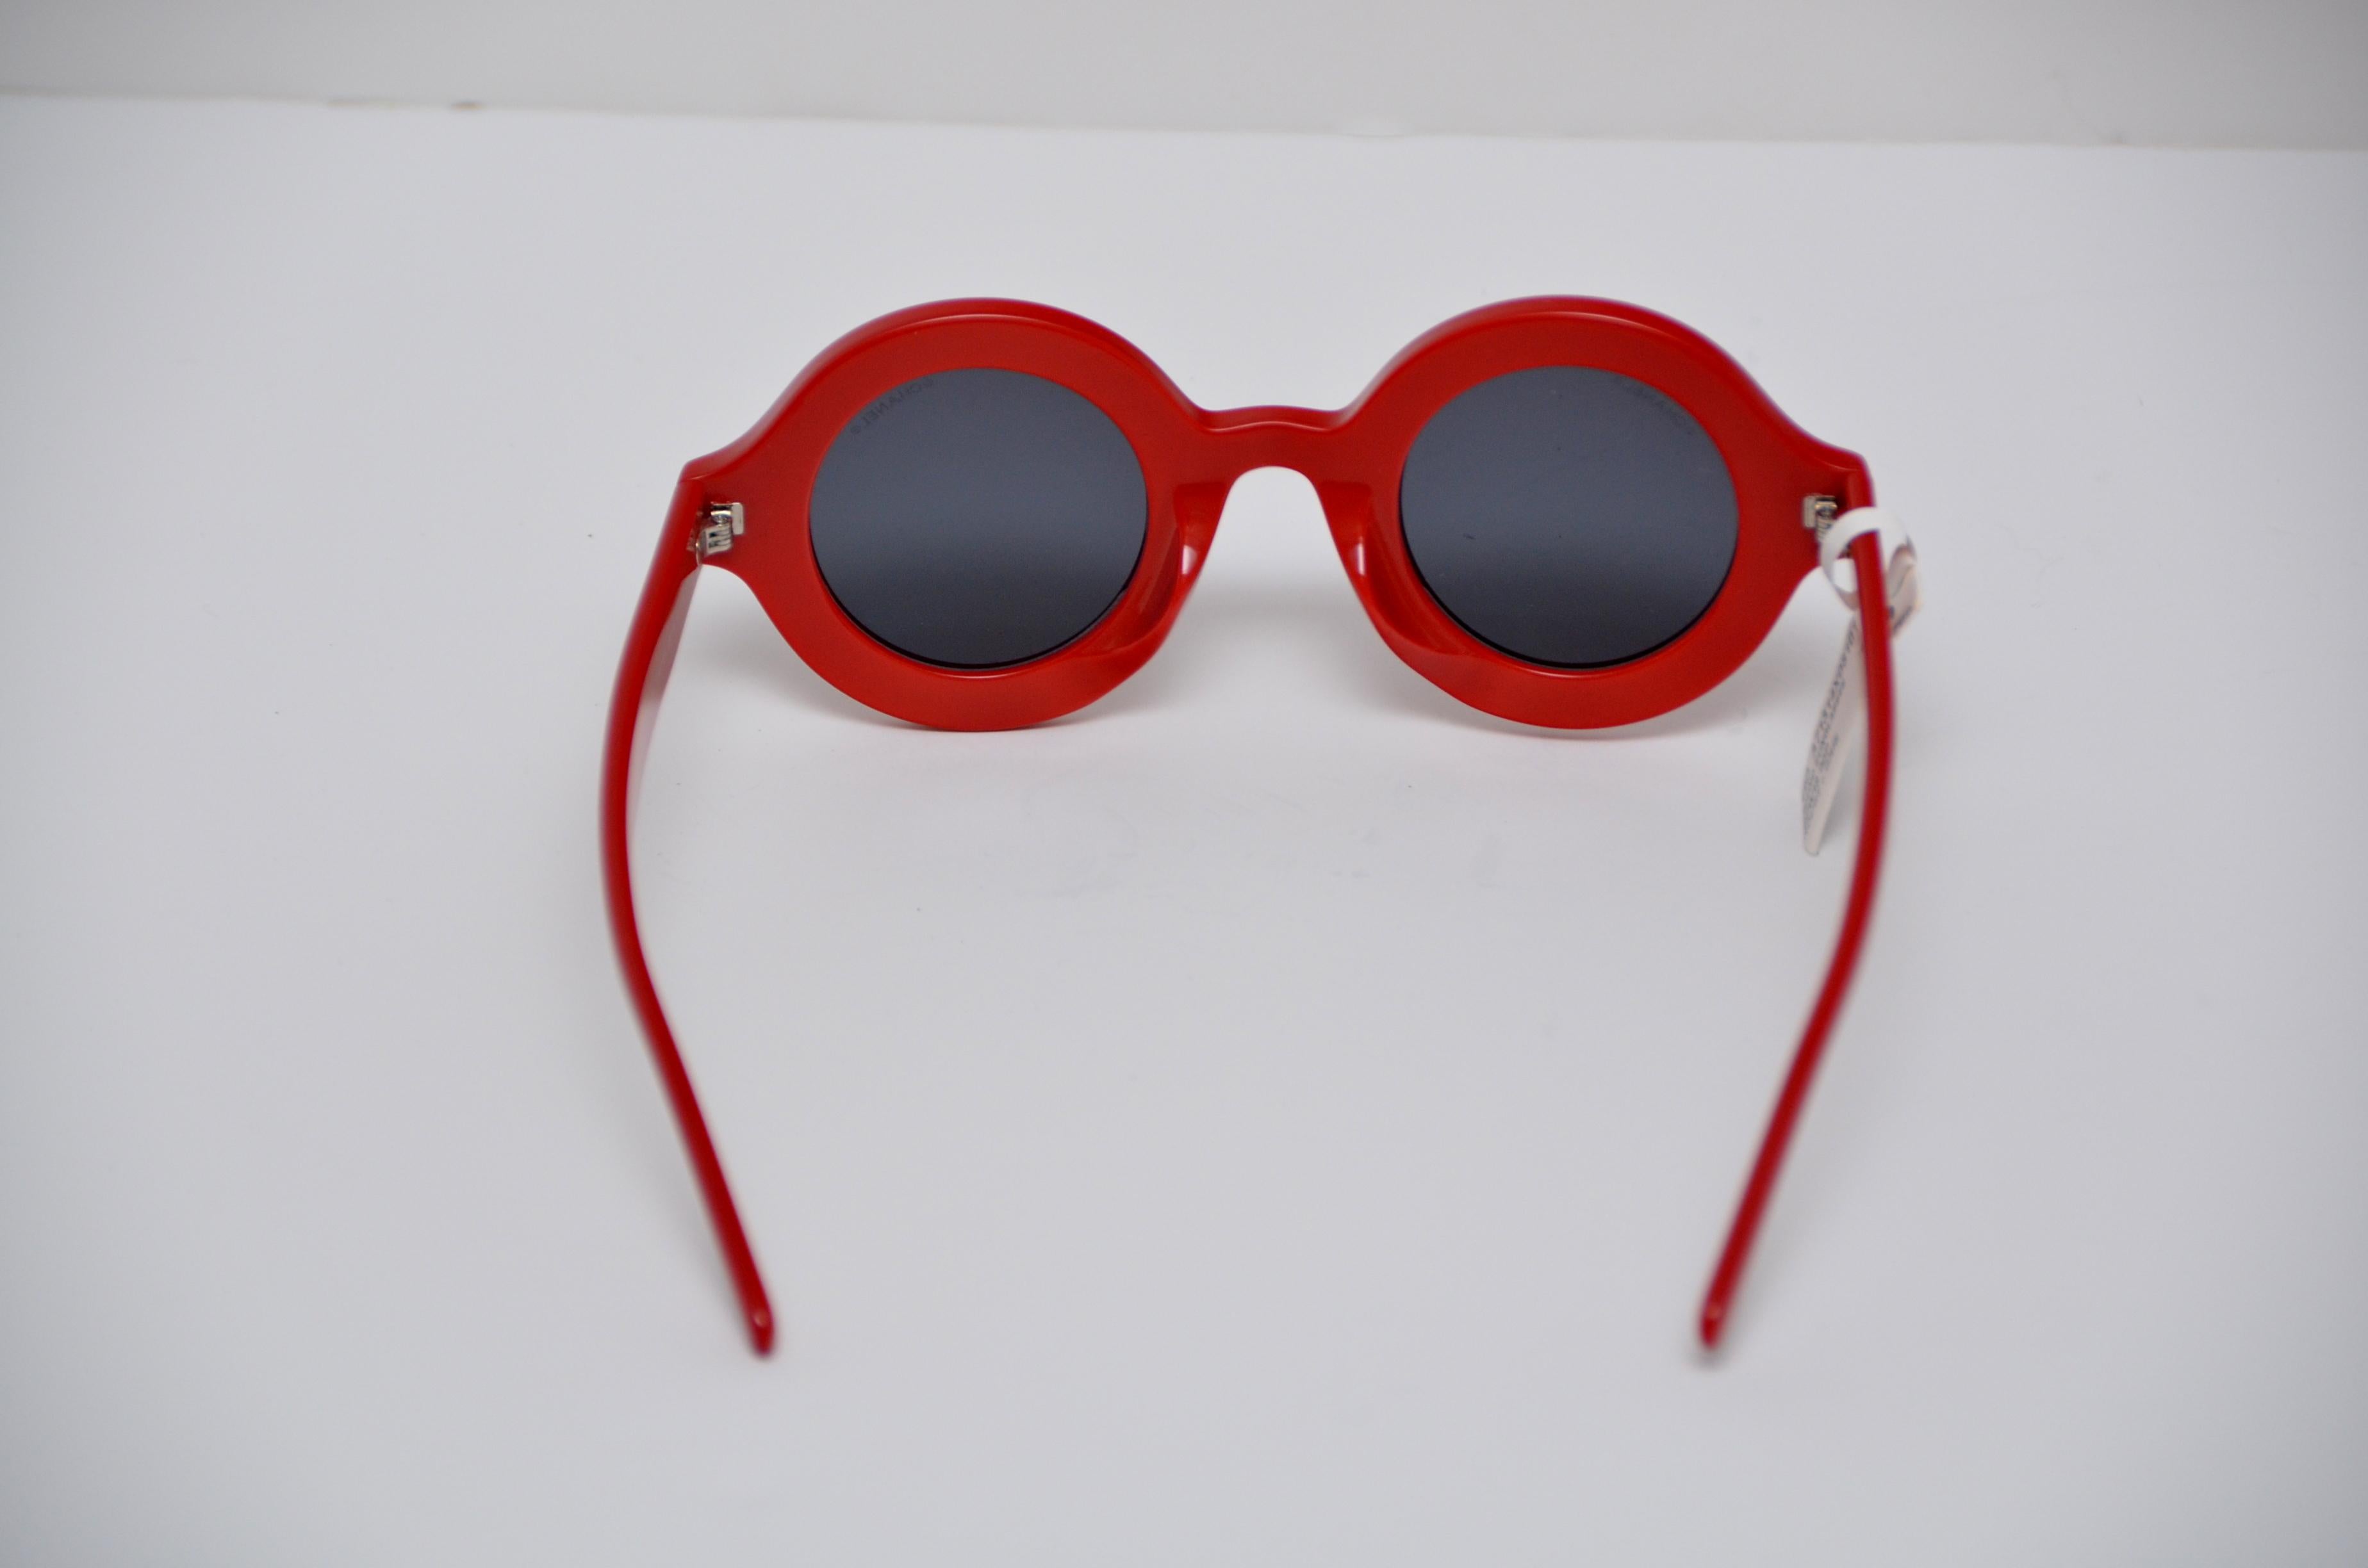 100% guaranteed authentic Chanel x Pharrell Capsule Collection Sunglasses .  
An urban capsule collection highlighting Pharrell Williams’ longterm relationship with the House of Chanel and initiated by Karl Lagerfeld .  
Color:  Red Rouge +Gris 